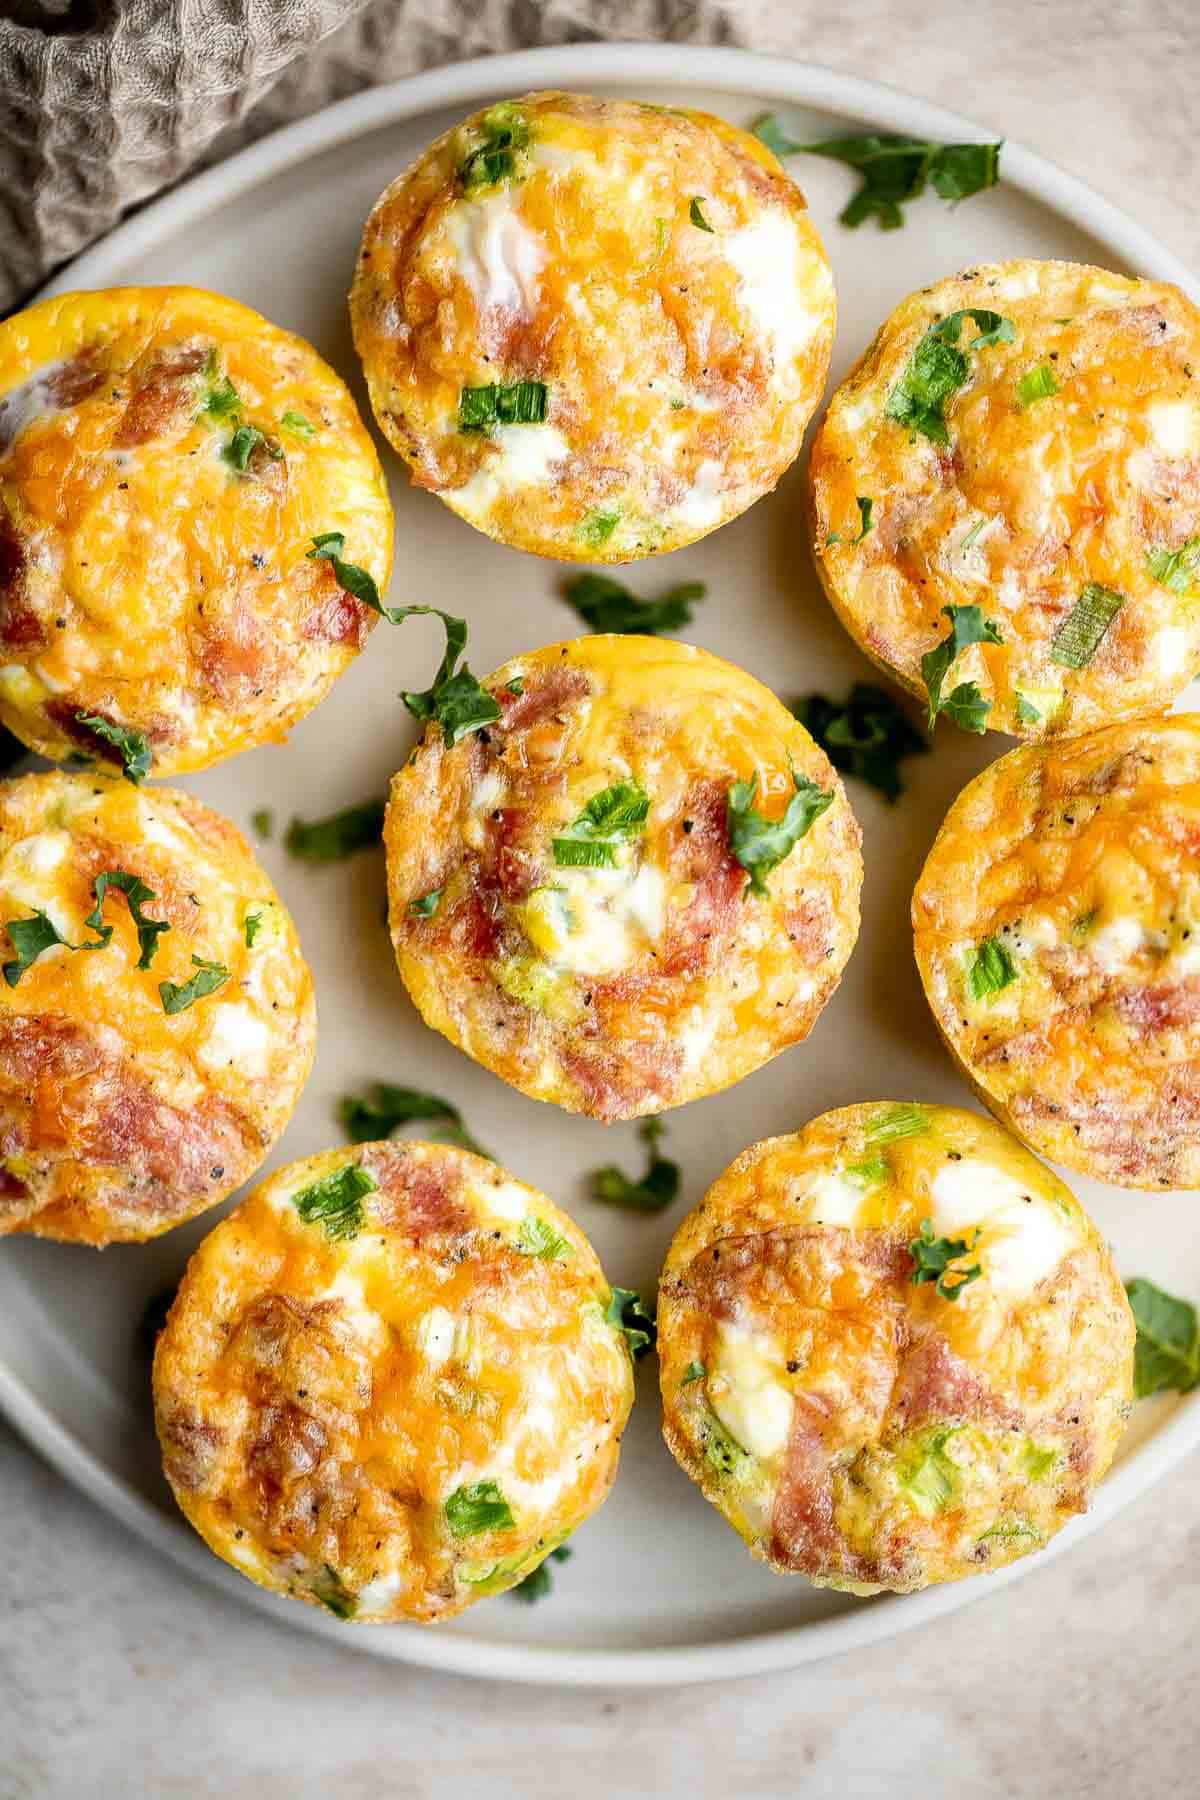 Egg muffins are a quick and easy way to meal prep breakfast on-the-go, loaded with cheddar cheese, bacon or salami, and green onions. Make 12 in 30 minutes. | aheadofthyme.com